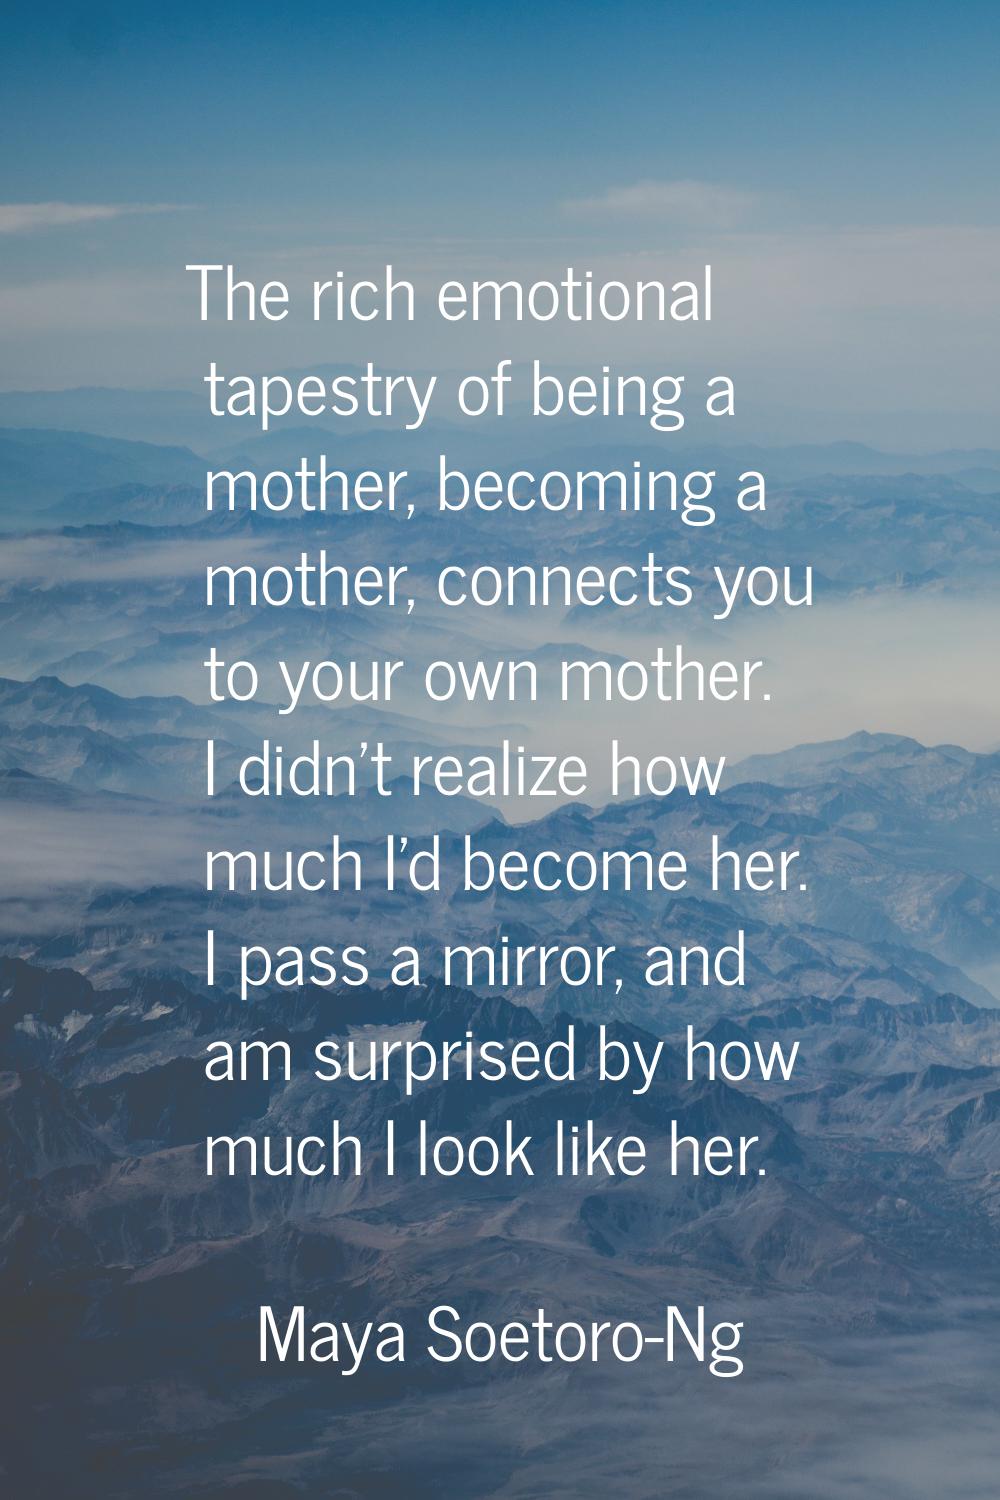 The rich emotional tapestry of being a mother, becoming a mother, connects you to your own mother. 